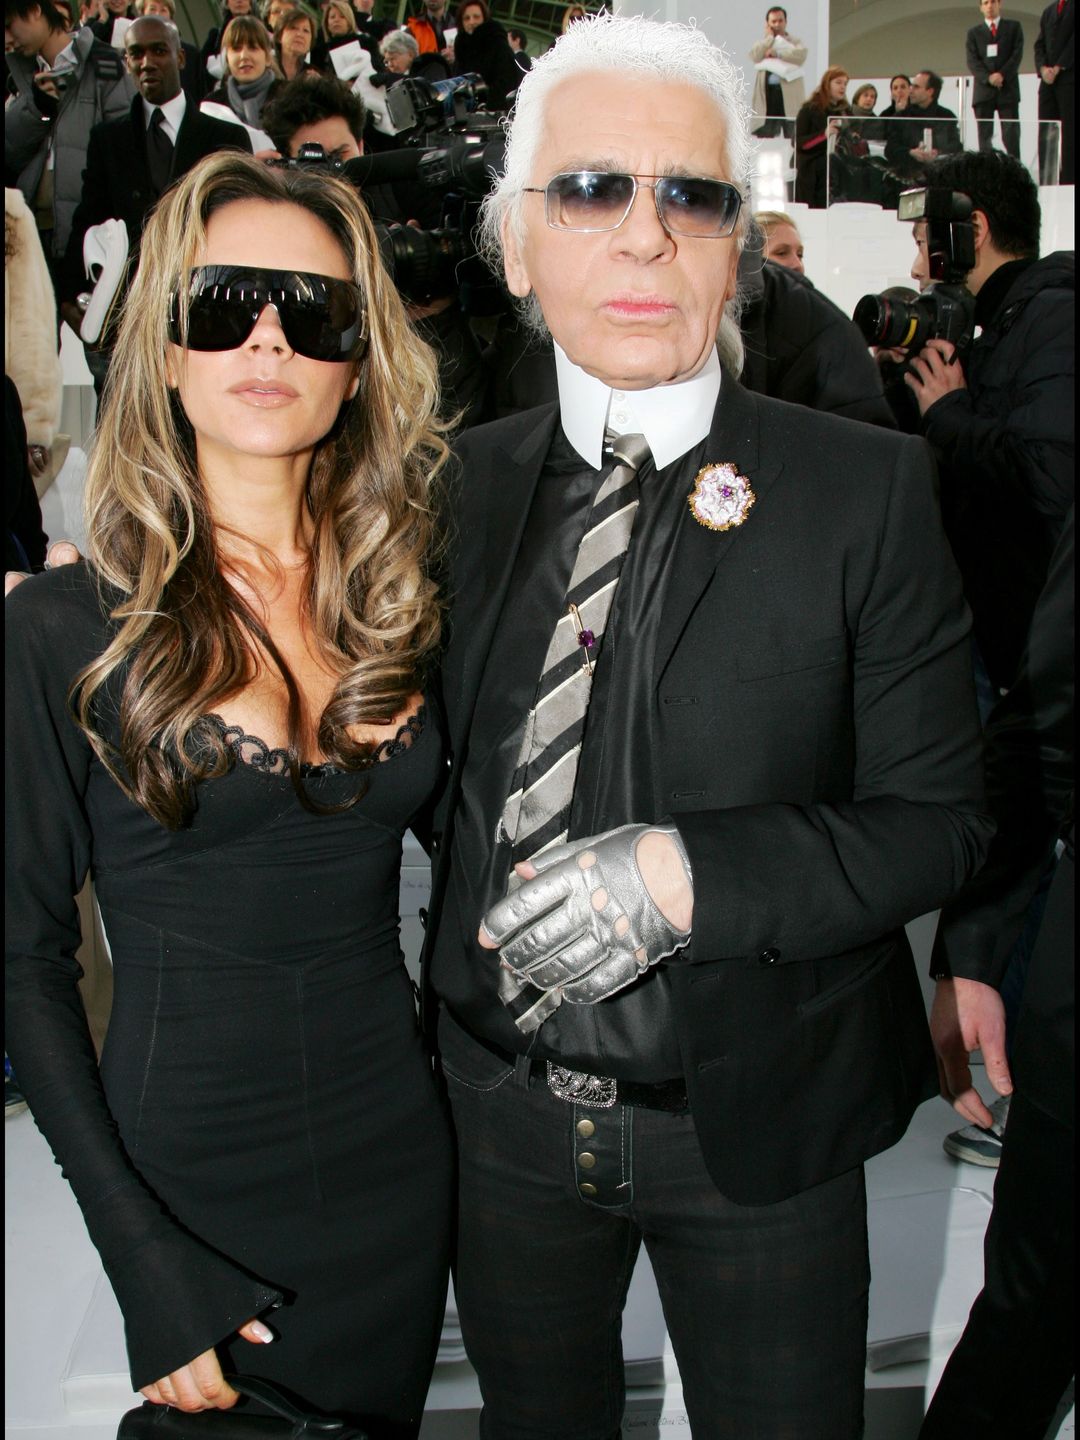 FRANCE - JANUARY 24:  Celebs At Chanel Spring-Summer 2006 Hc Fashion Show In Paris - On January 24Th, 2006 - In Paris, France - Here, Victoria Beckham And Karl Lagerfeld  (Photo by Serge BENHAMOU/Gamma-Rapho via Getty Images)